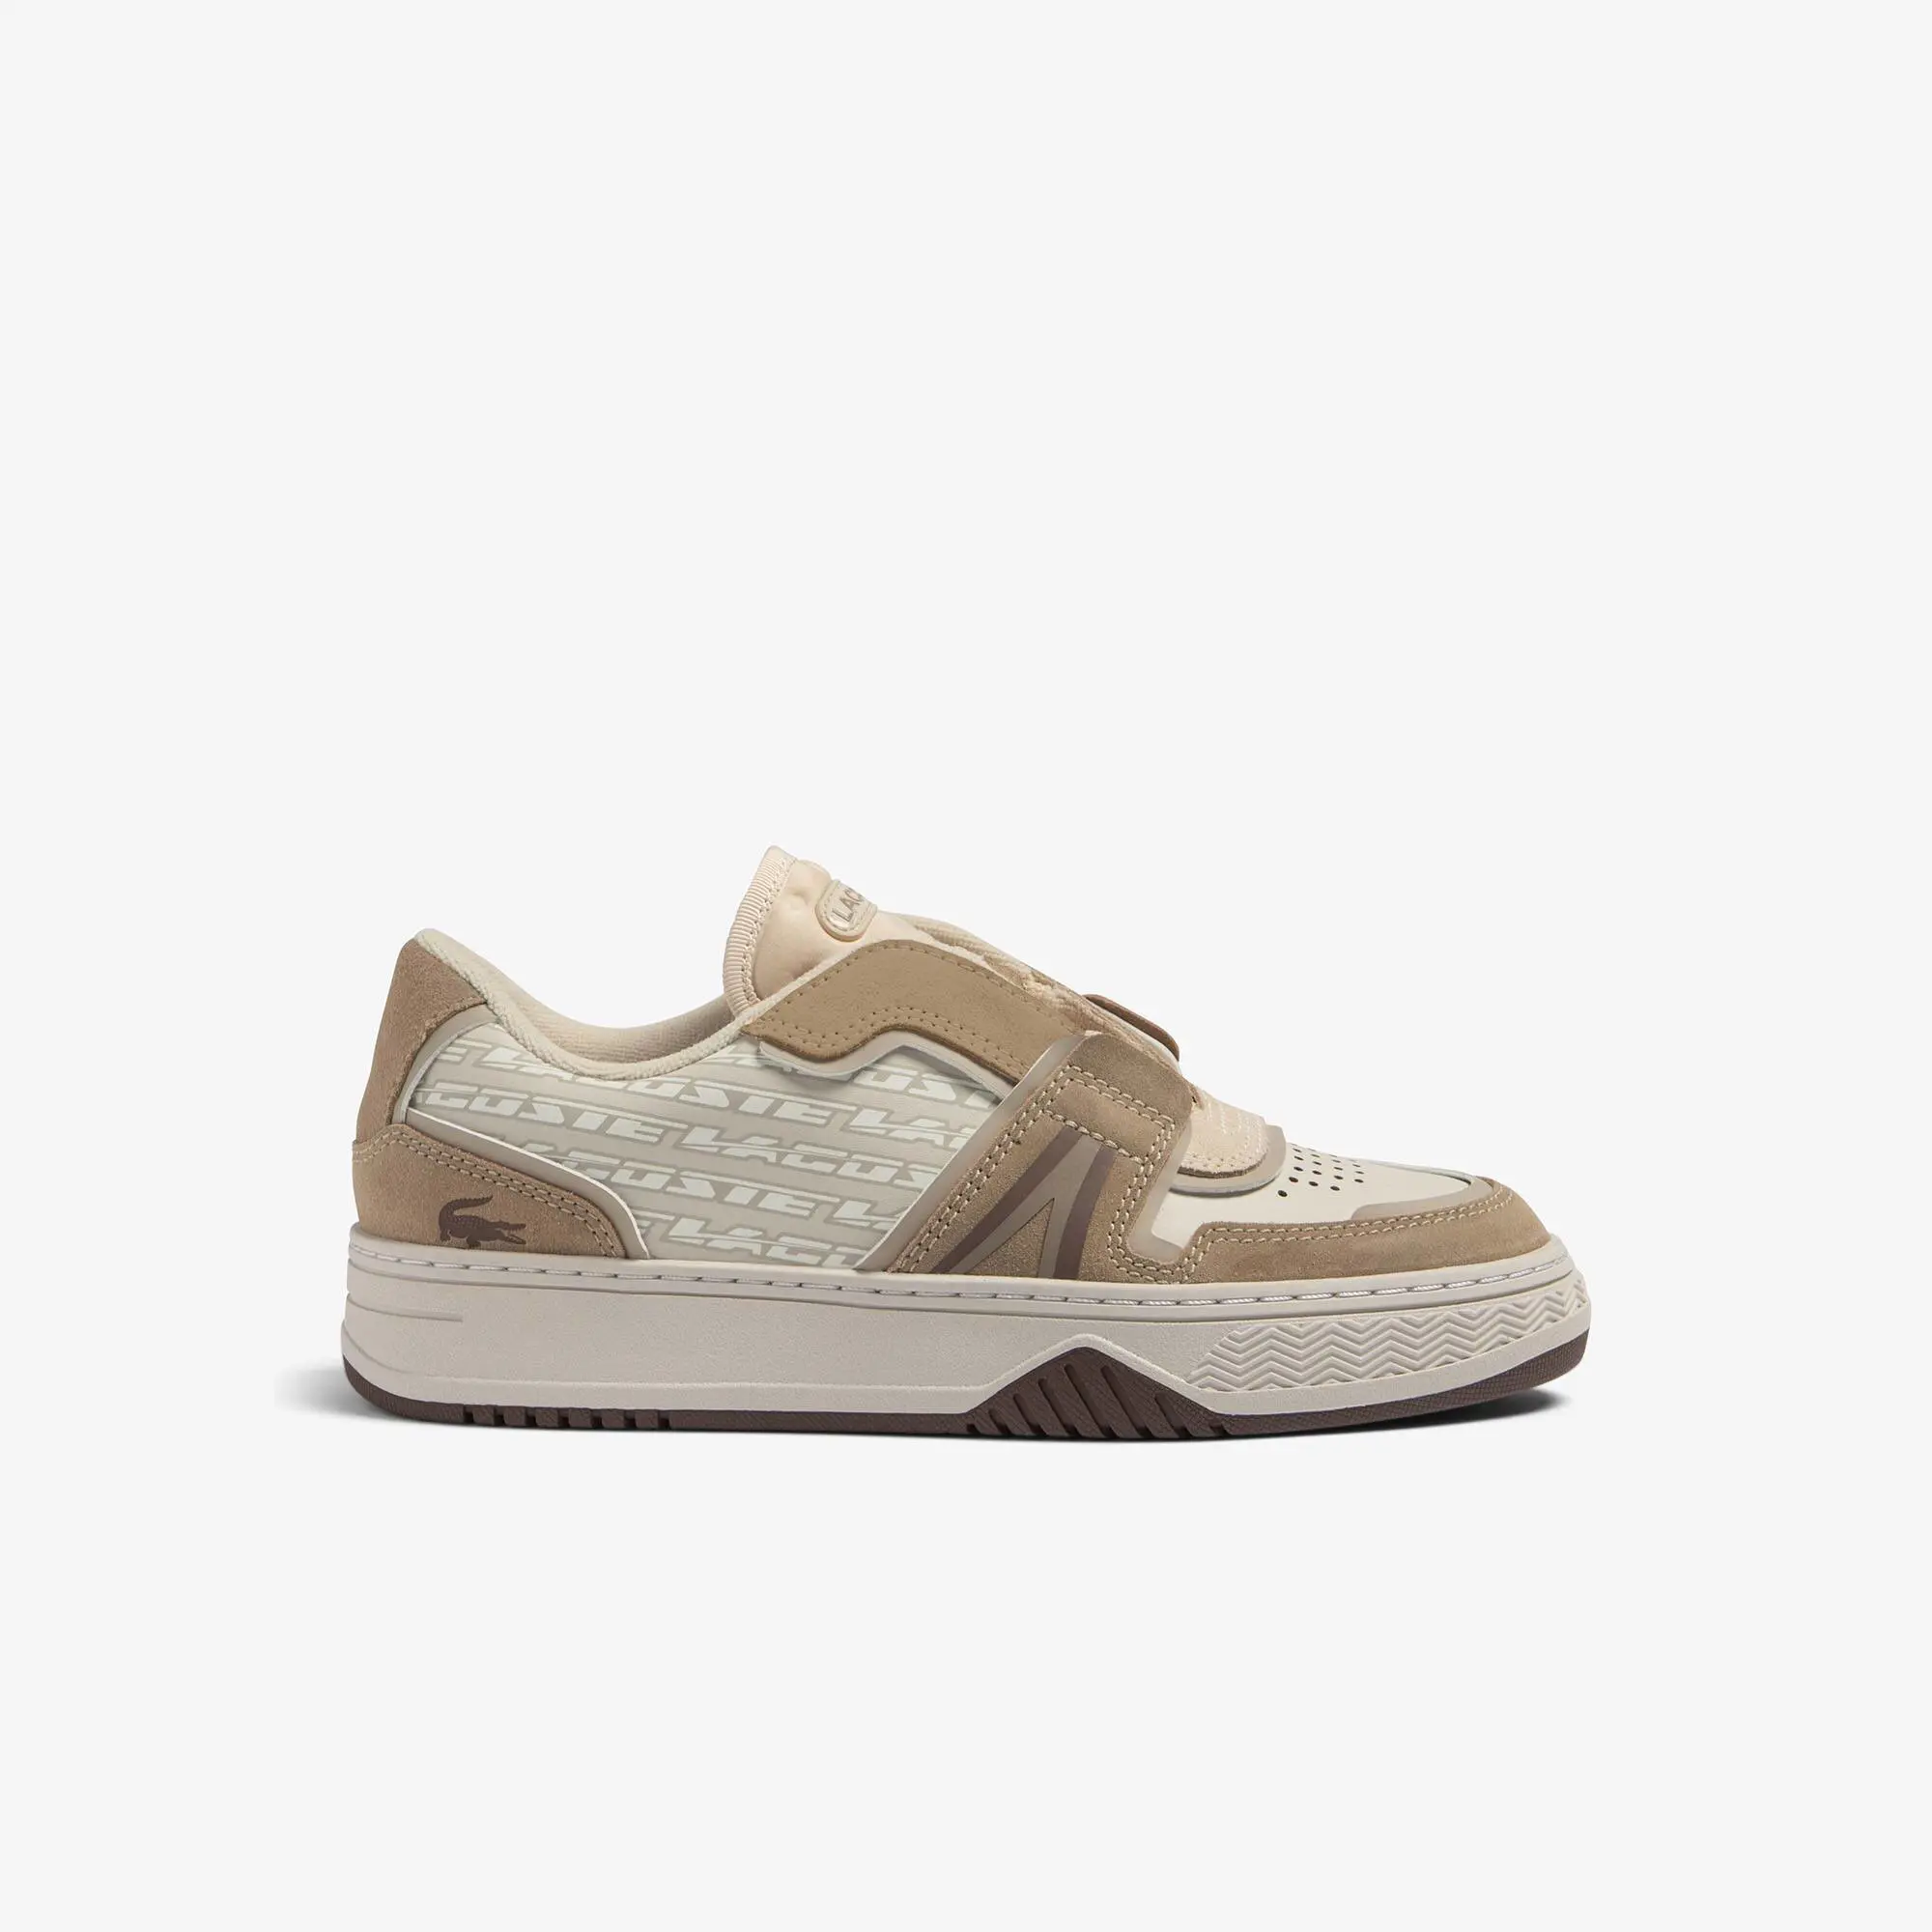 Lacoste Women's Lacoste L001 Crafted Textile Tonal Trainers. 1